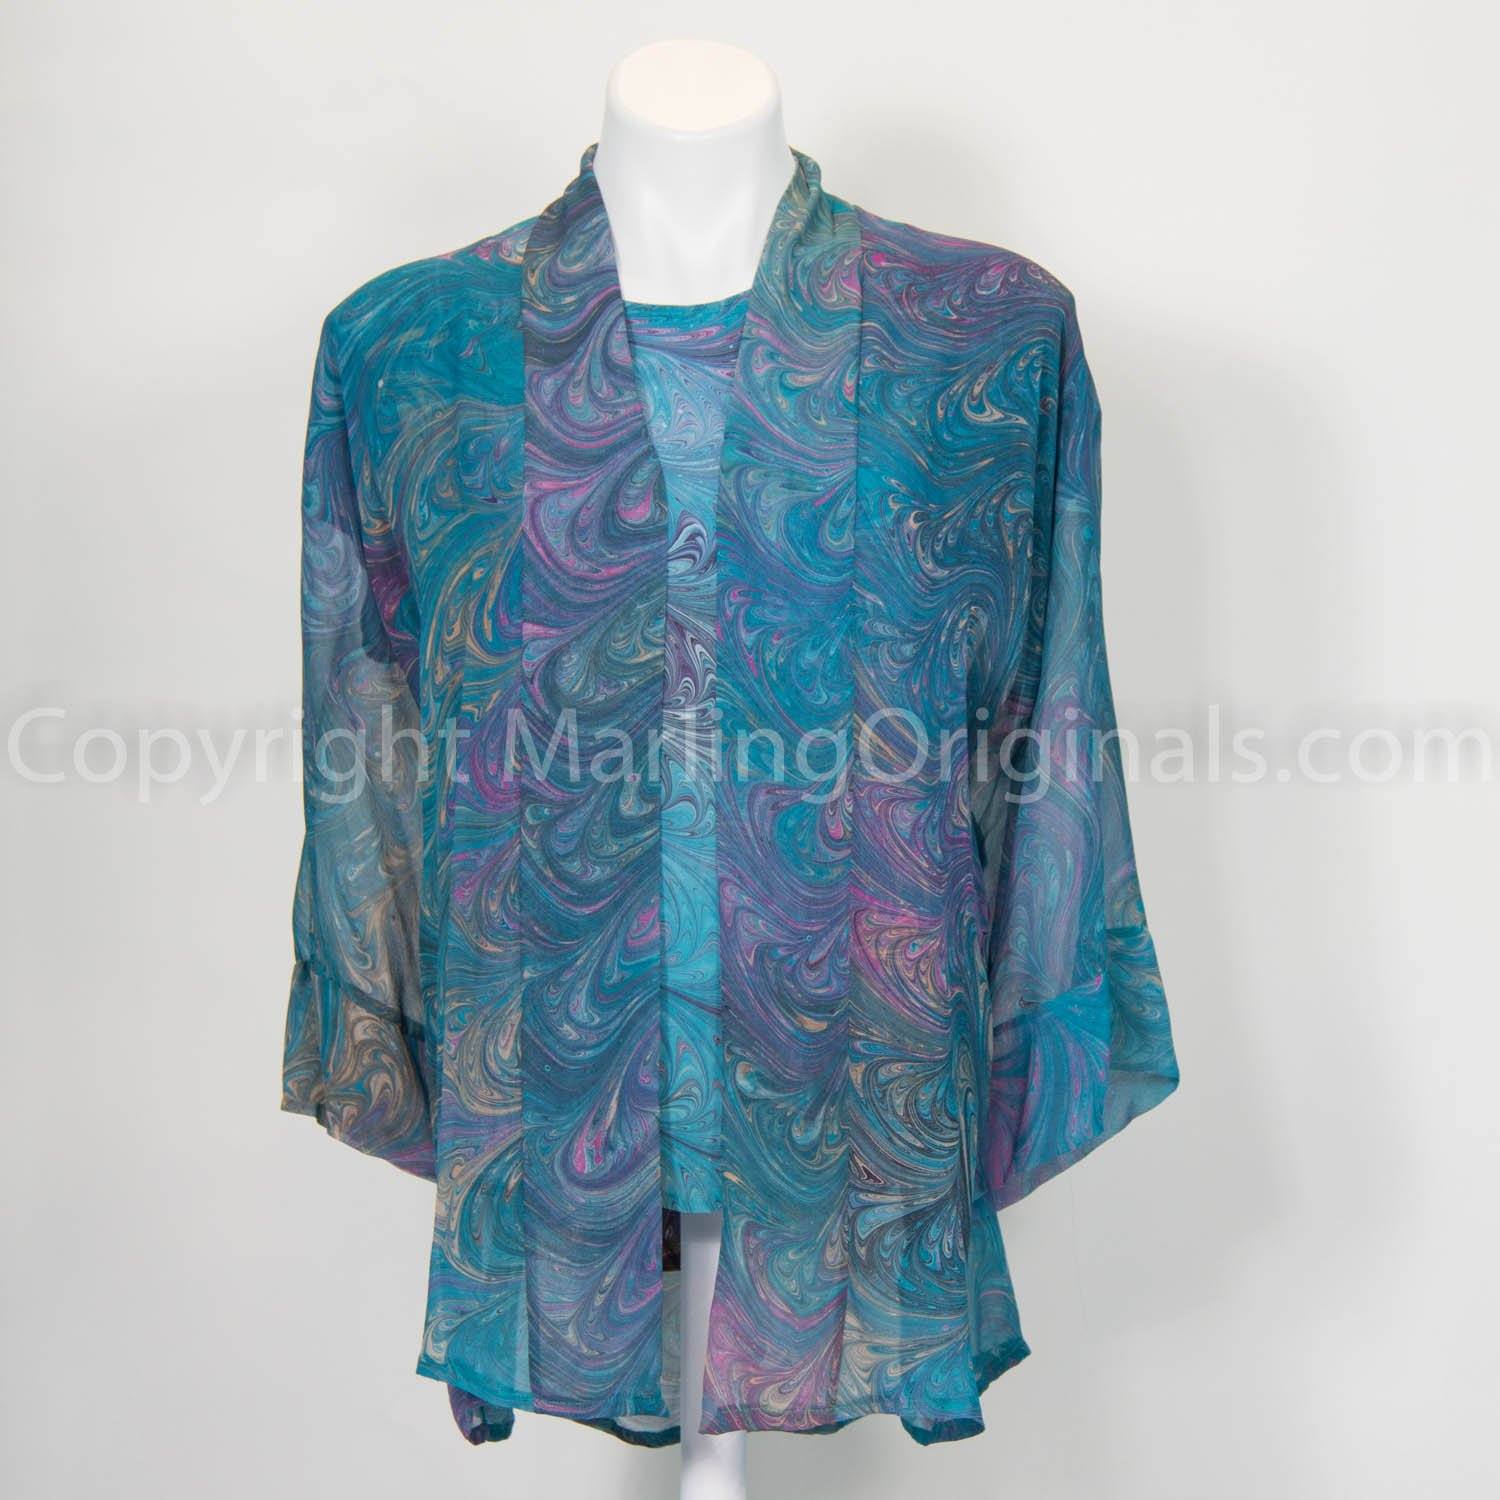 marbled chiffon kimono jacket shown with matching blouse. Teal, pink, gold tones.